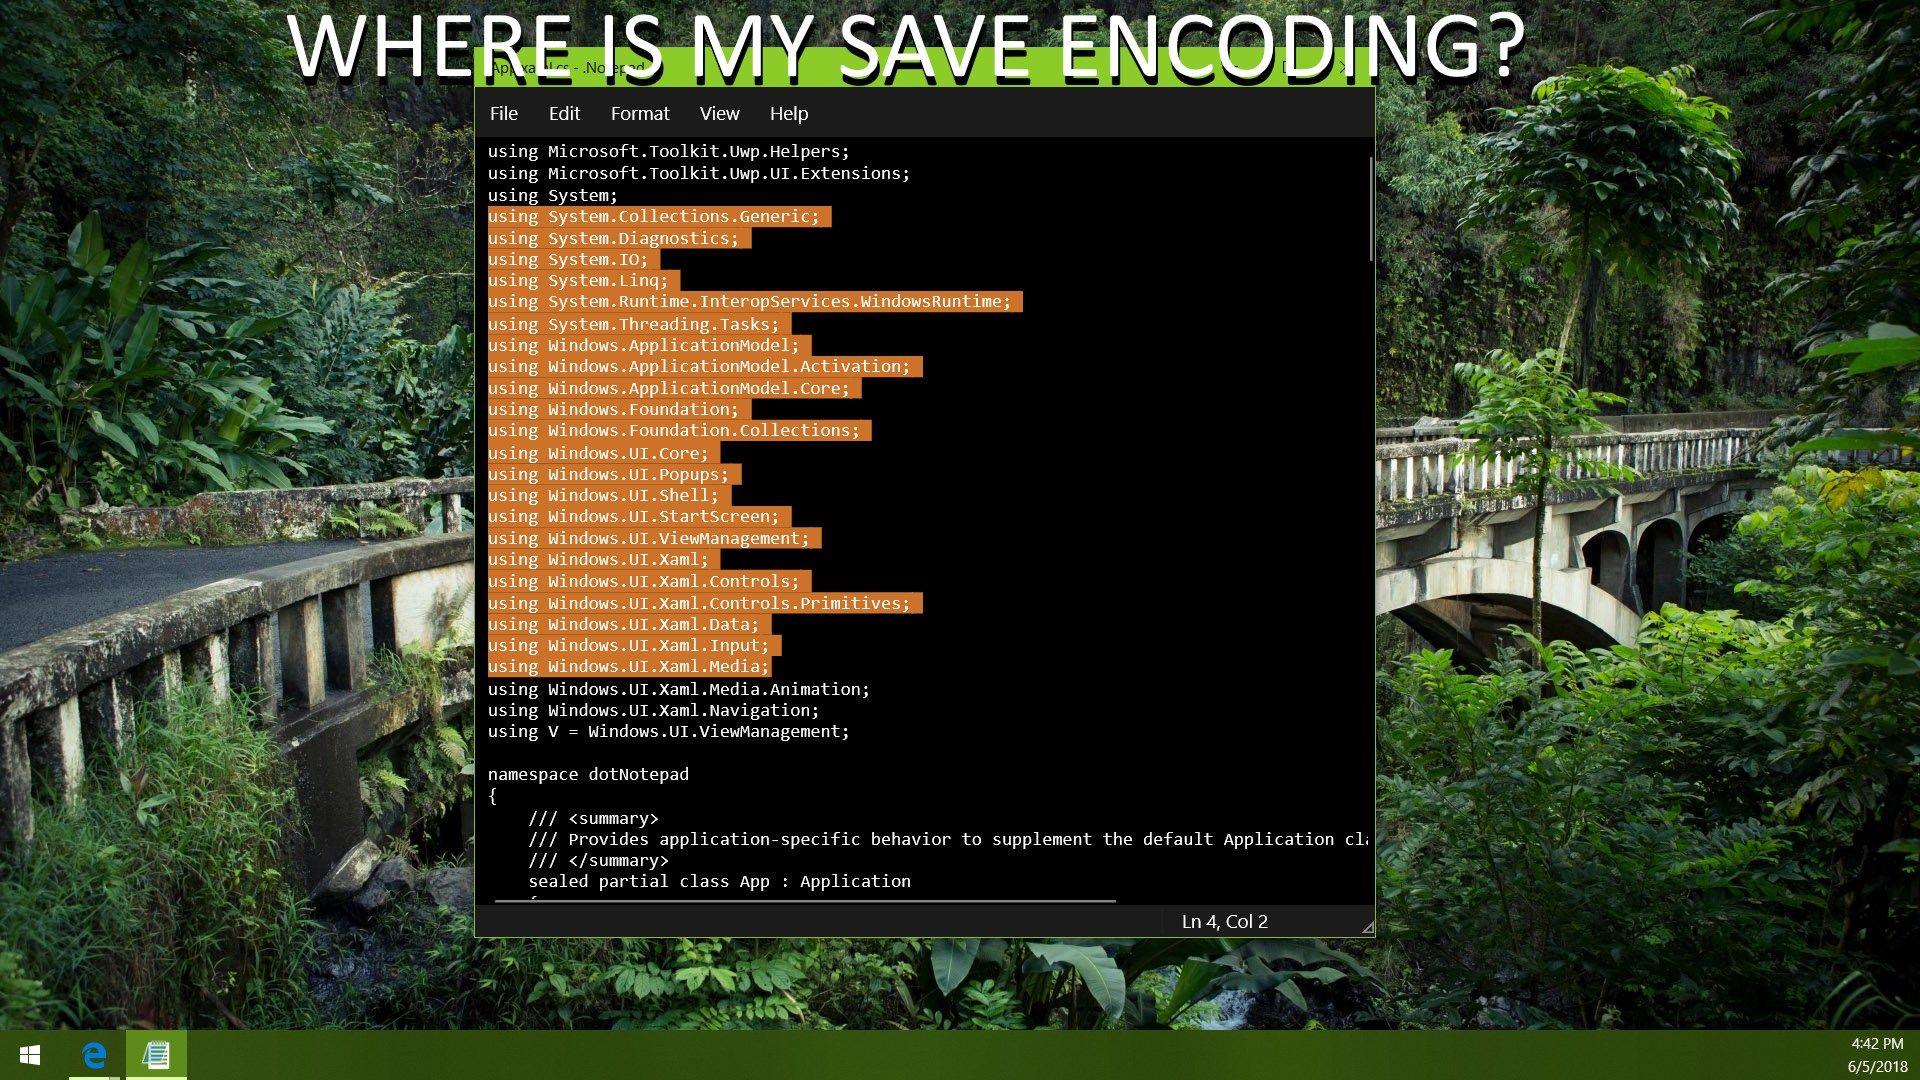 Where is my save encoding?